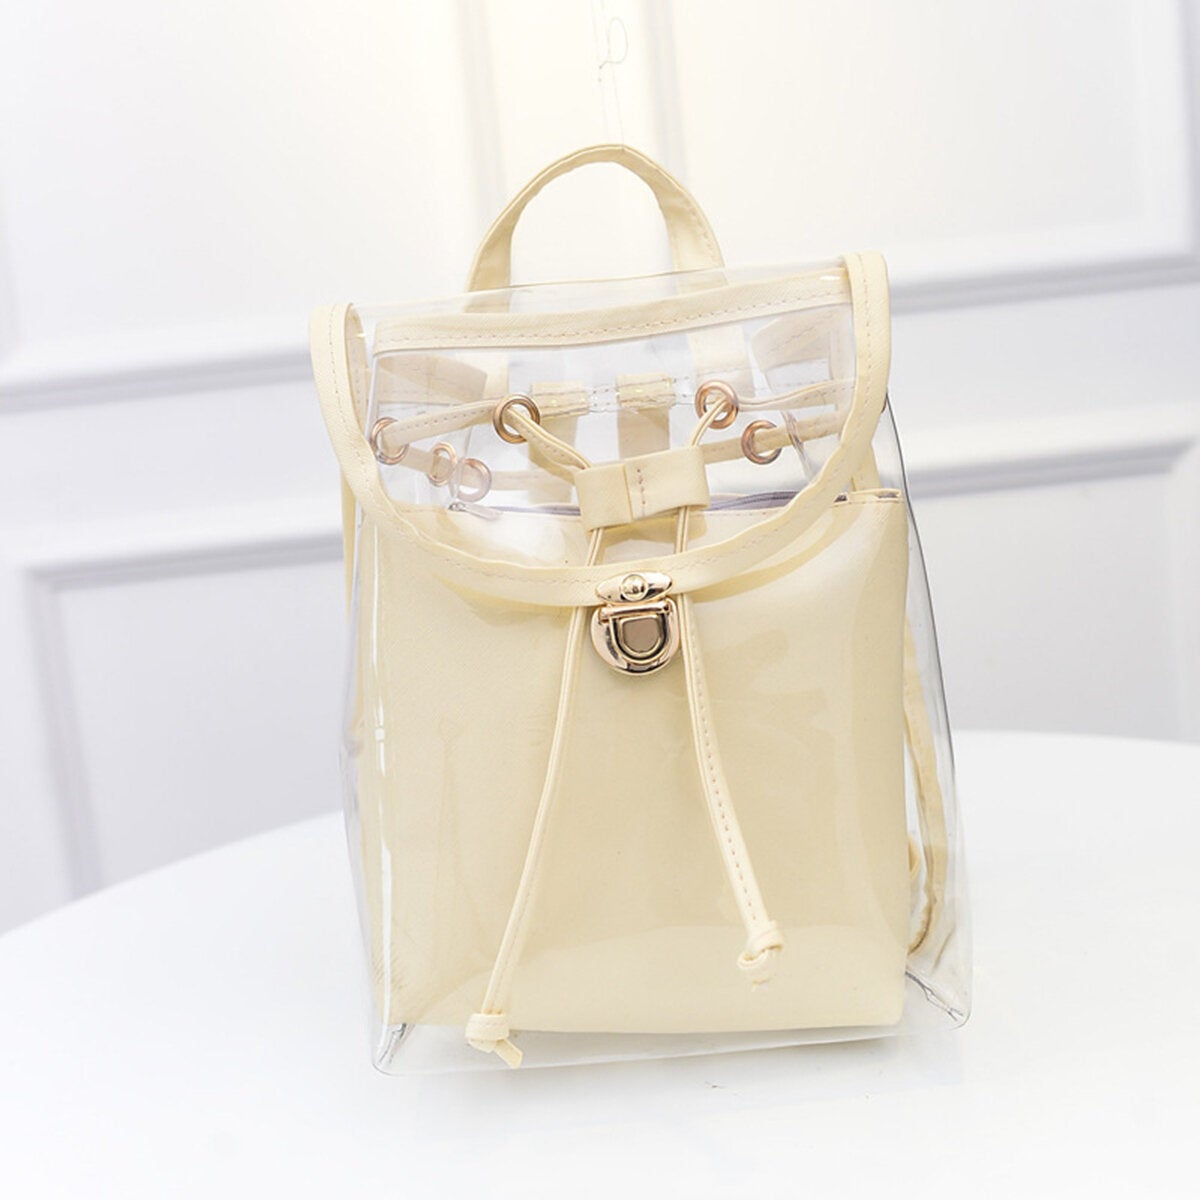 2 in 1 Clear Girl Transparent Fashison Backpack Satchel Women Jelly Beach Tote School